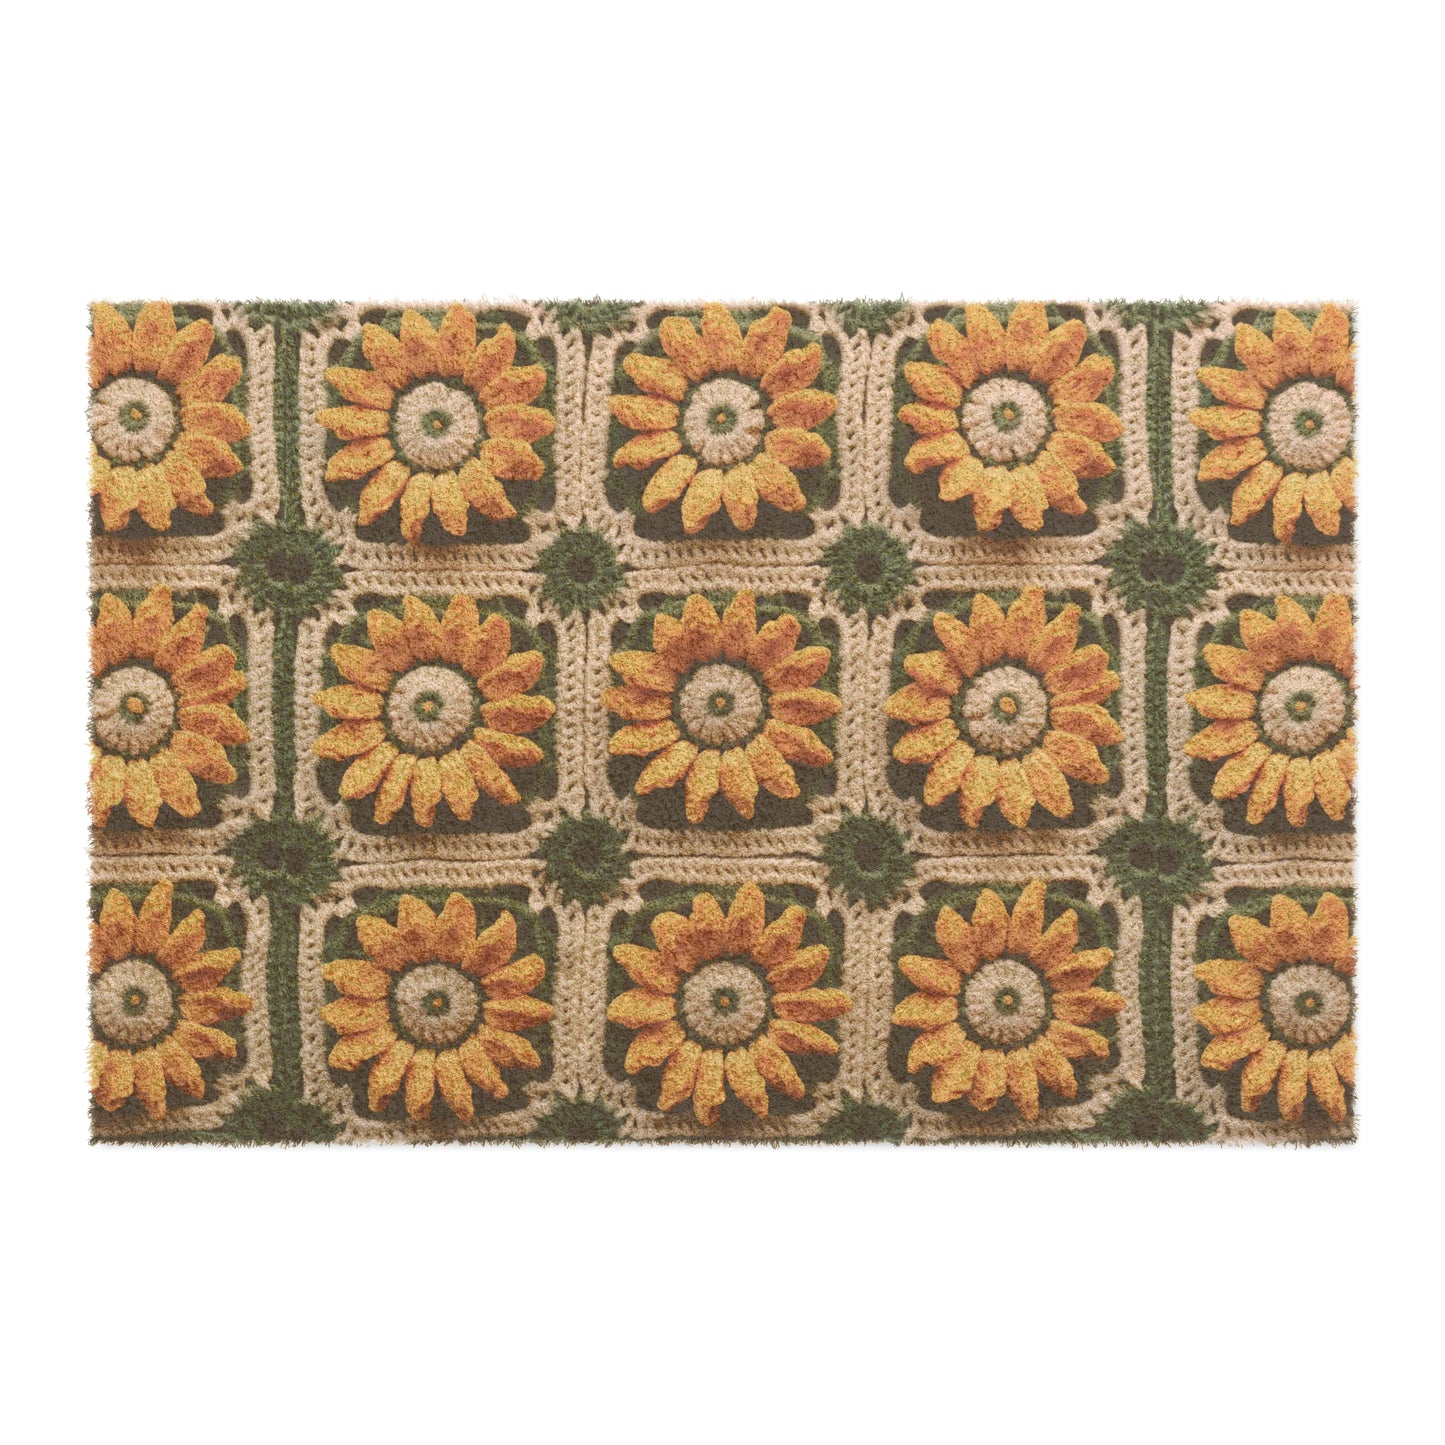 Sunflower Crochet Elegance, Granny Square Design, Radiant Floral Motif. Bring the Warmth of Sunflowers to Your Space - Door Coir Mat